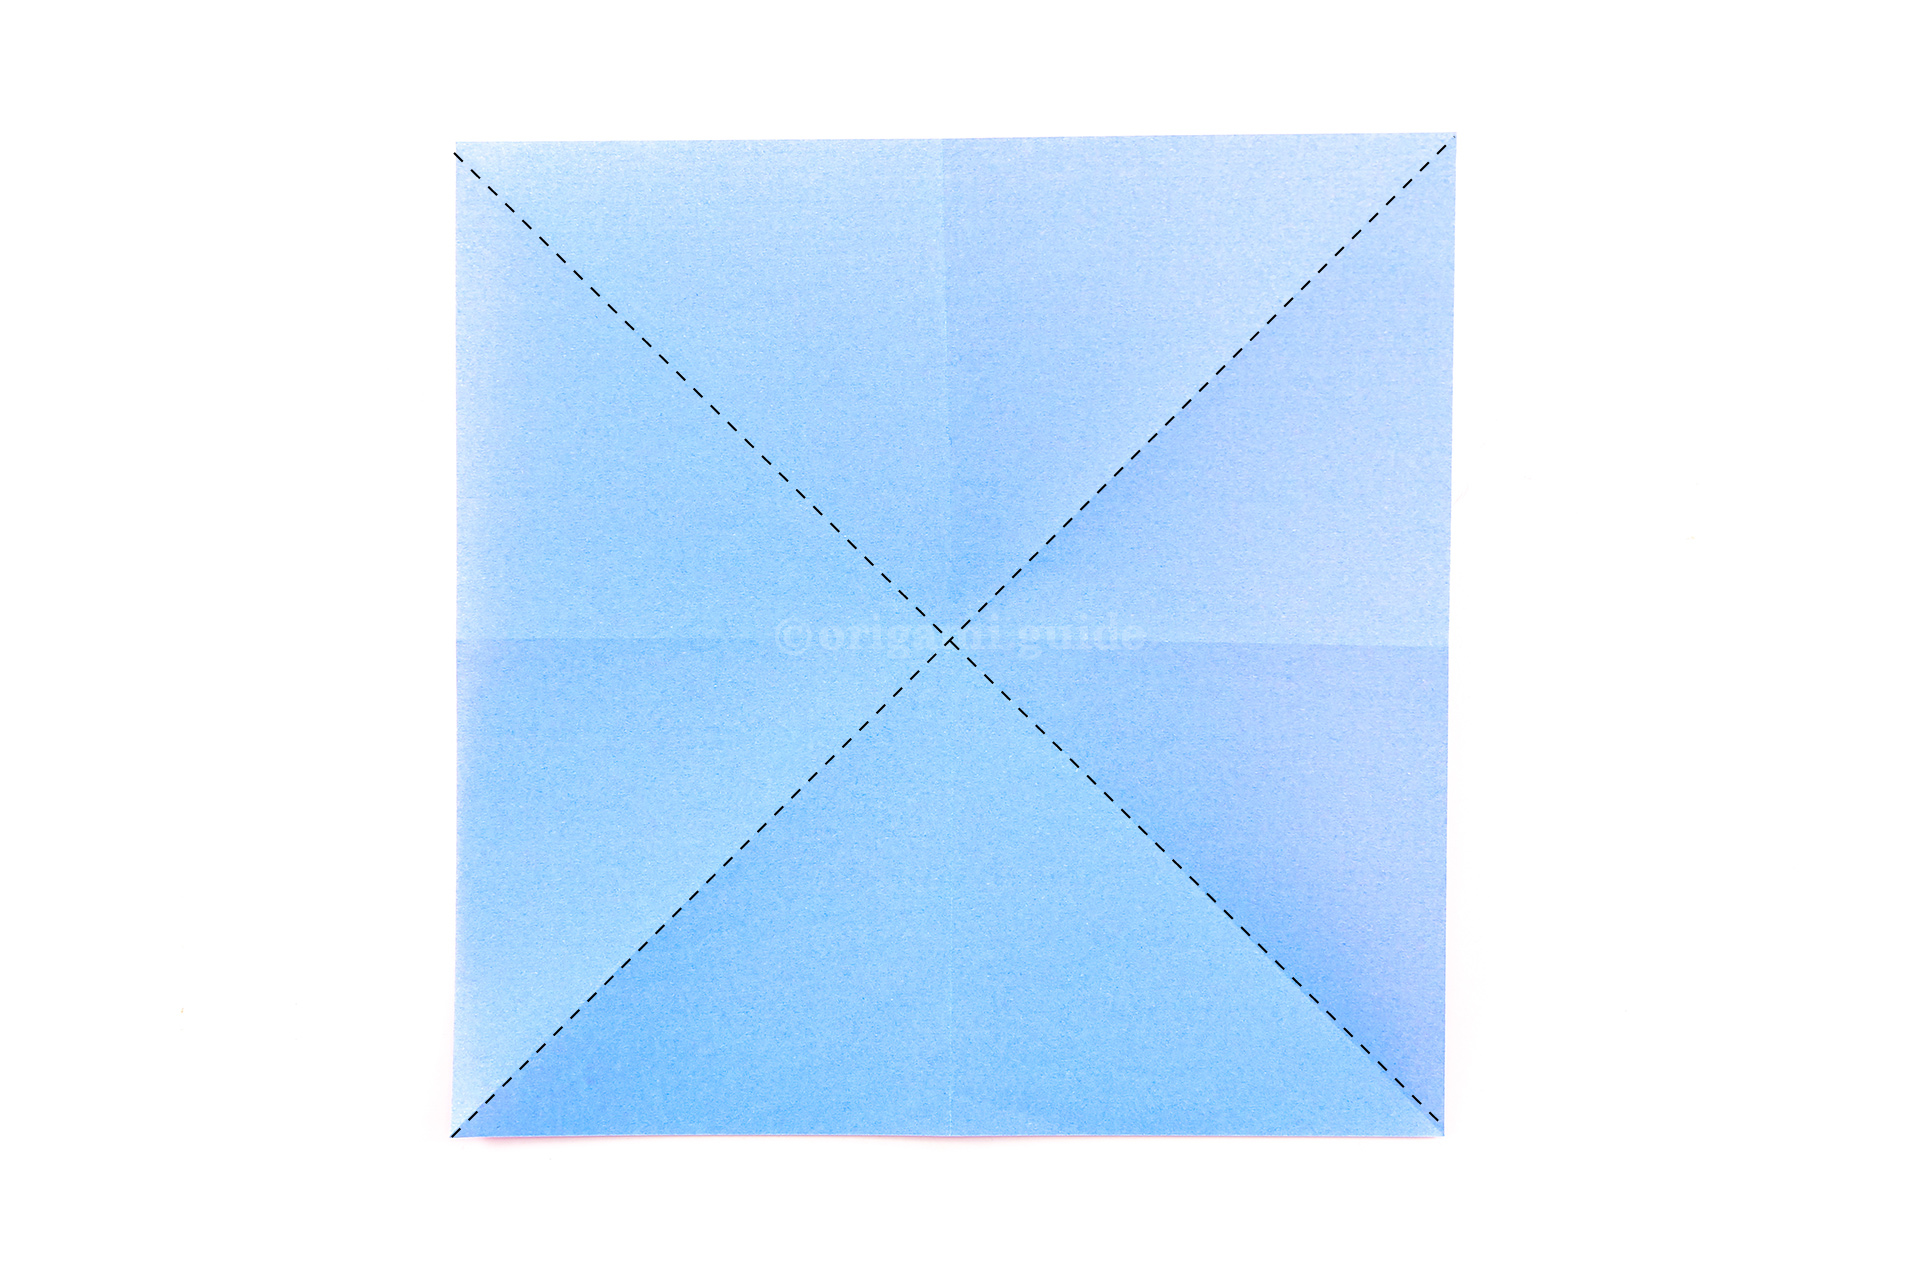 Flip the paper over to the other side. Fold the paper diagonally in both directions.